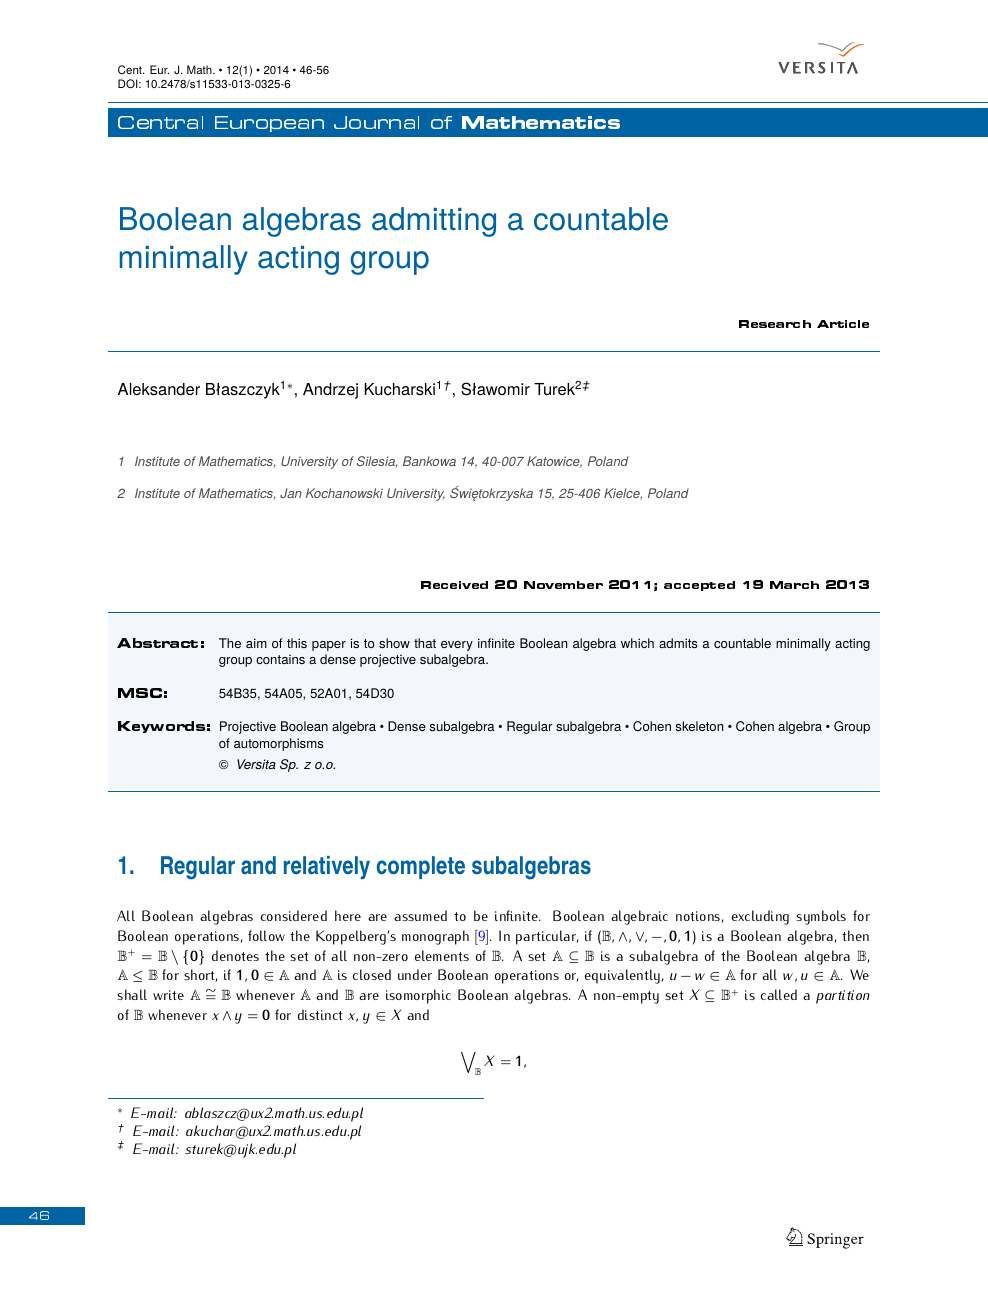 Boolean Algebras Admitting A Countable Minimally Acting Group Topic Of Research Paper In Mathematics Download Scholarly Article Pdf And Read For Free On Cyberleninka Open Science Hub